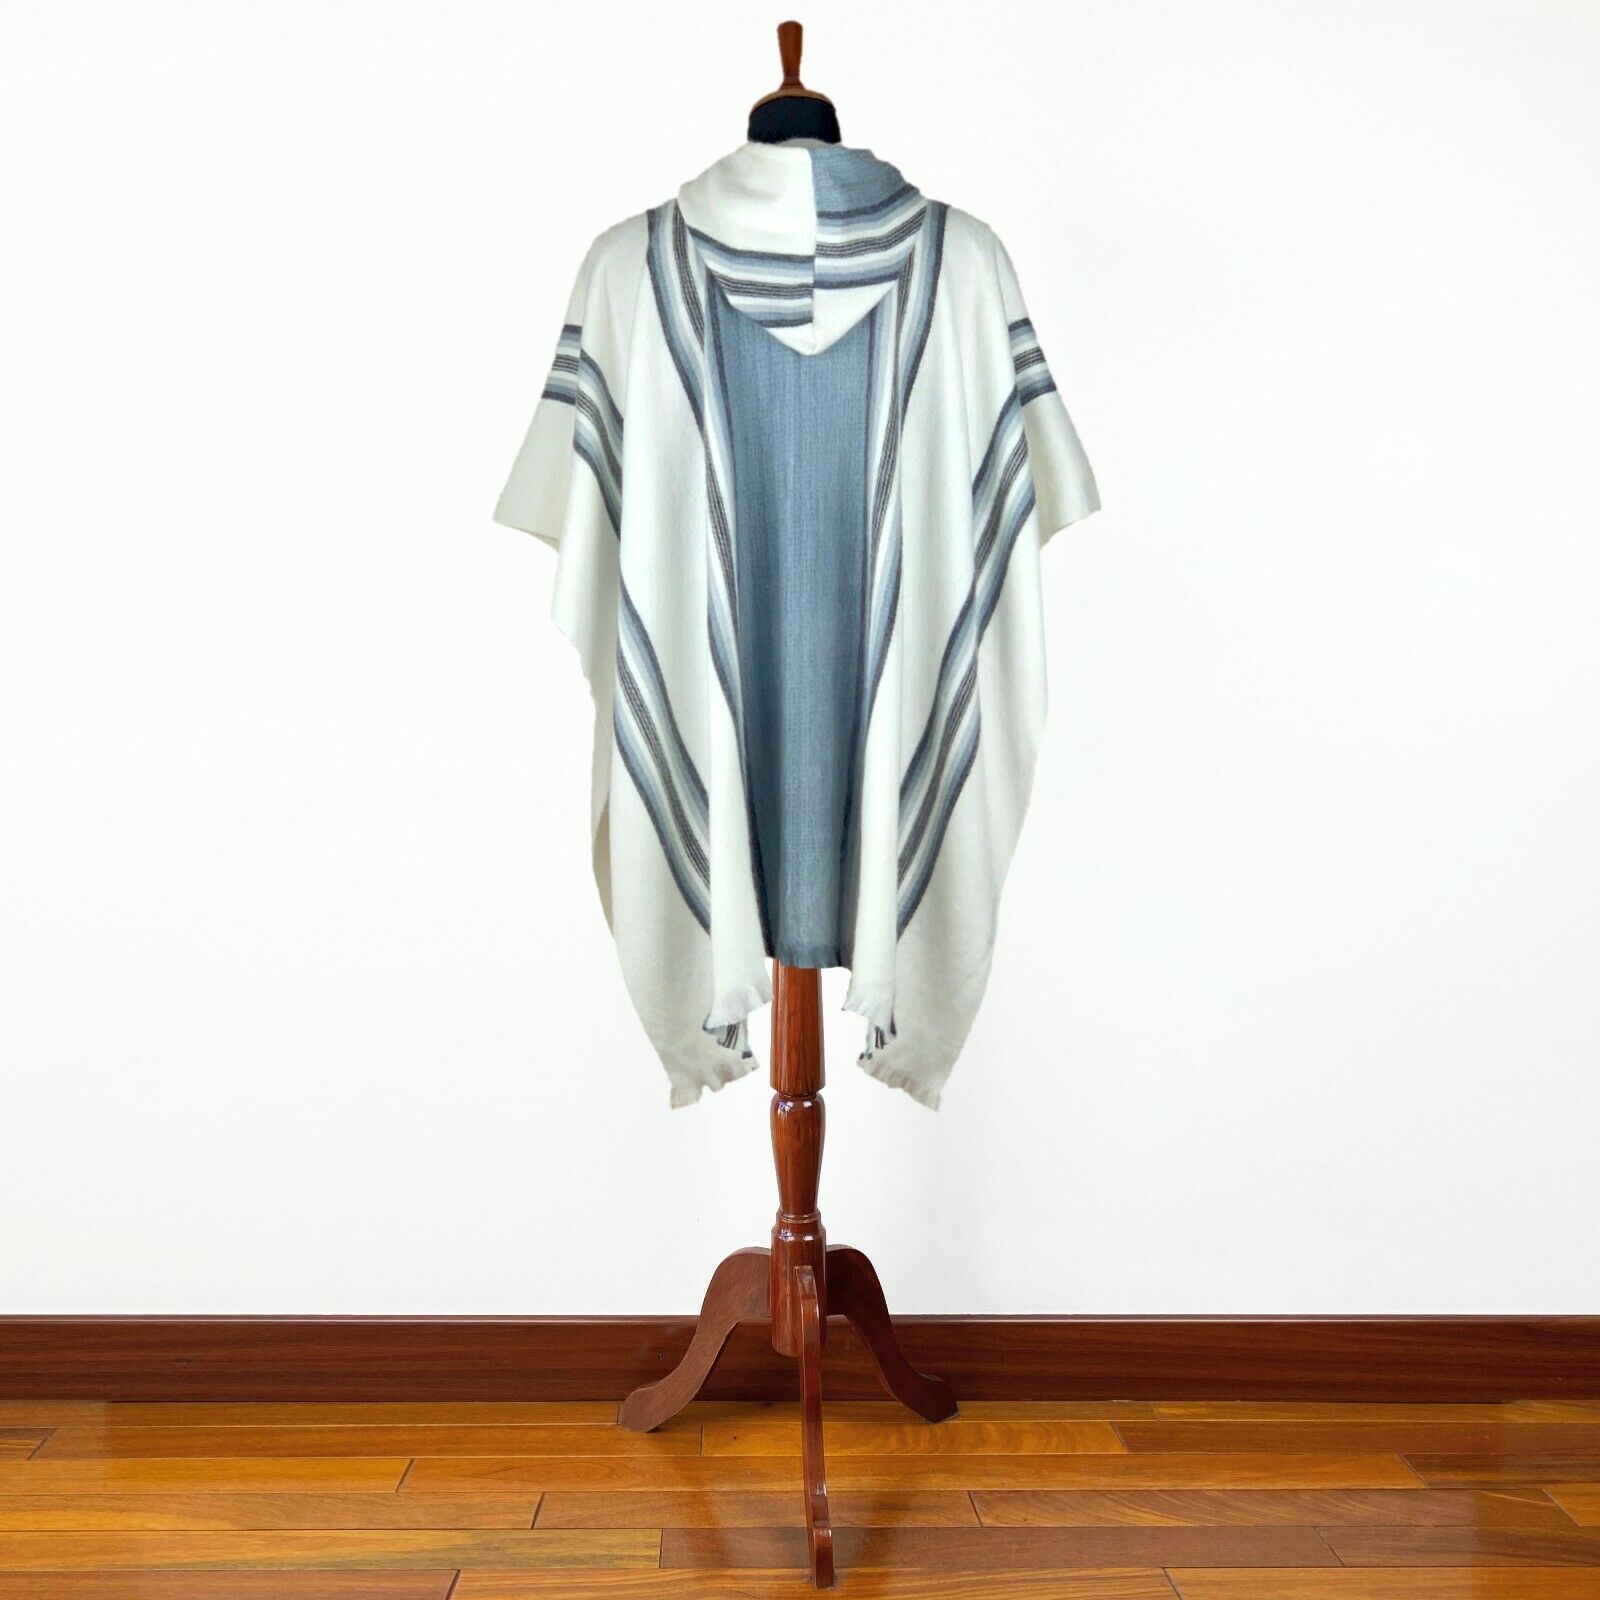 Carchipulla - Lightweight Baby Alpaca Hooded Poncho - Striped White/Gray Pattern - Unisex